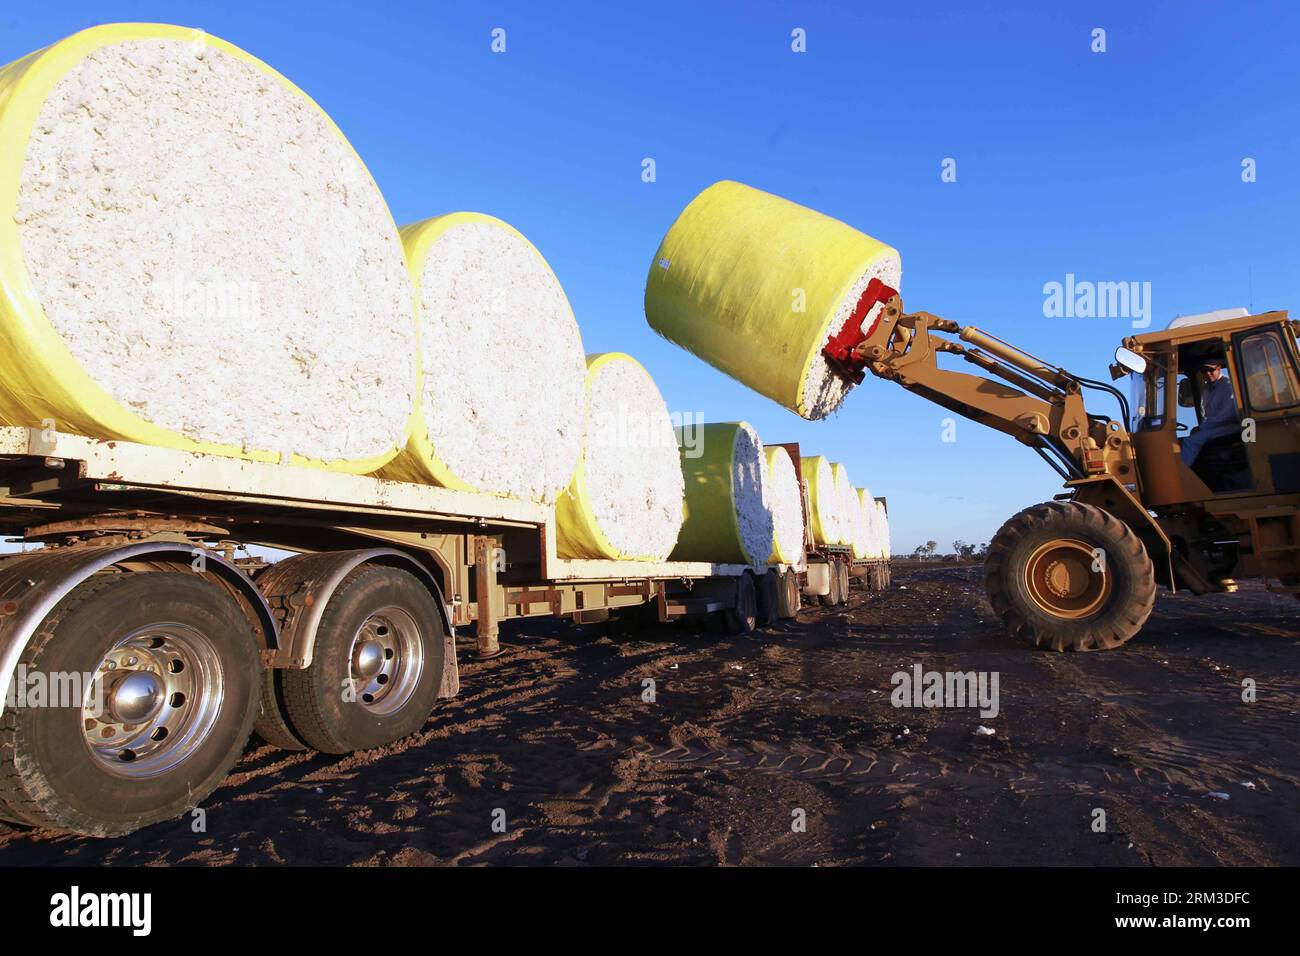 Bildnummer: 60154769  Datum: 17.07.2013  Copyright: imago/Xinhua SYDNEY, July 17 2013 - A roll of cotton is loaded at UNIBALE, a subsidiary of Chinatex Corporation, in Moree, New South Wales, Australia, on July 17, 2013. Chinatex Corporation purchased the cotton base to plant cotton in Moree in early 1990s. The base, covering an area of 5,200 hectares, owns the anual productivity of more than 2,700,000 kg unginned cotton and provides mainly for Chinatex Corporation and partly for international market. (Xinhua/Jin Linpeng) (lr) AUSTRALIA-NEW SOUTH WALES-MOREE-CHINATEX CORP-COTTON BASE-UNIBALE P Stock Photo